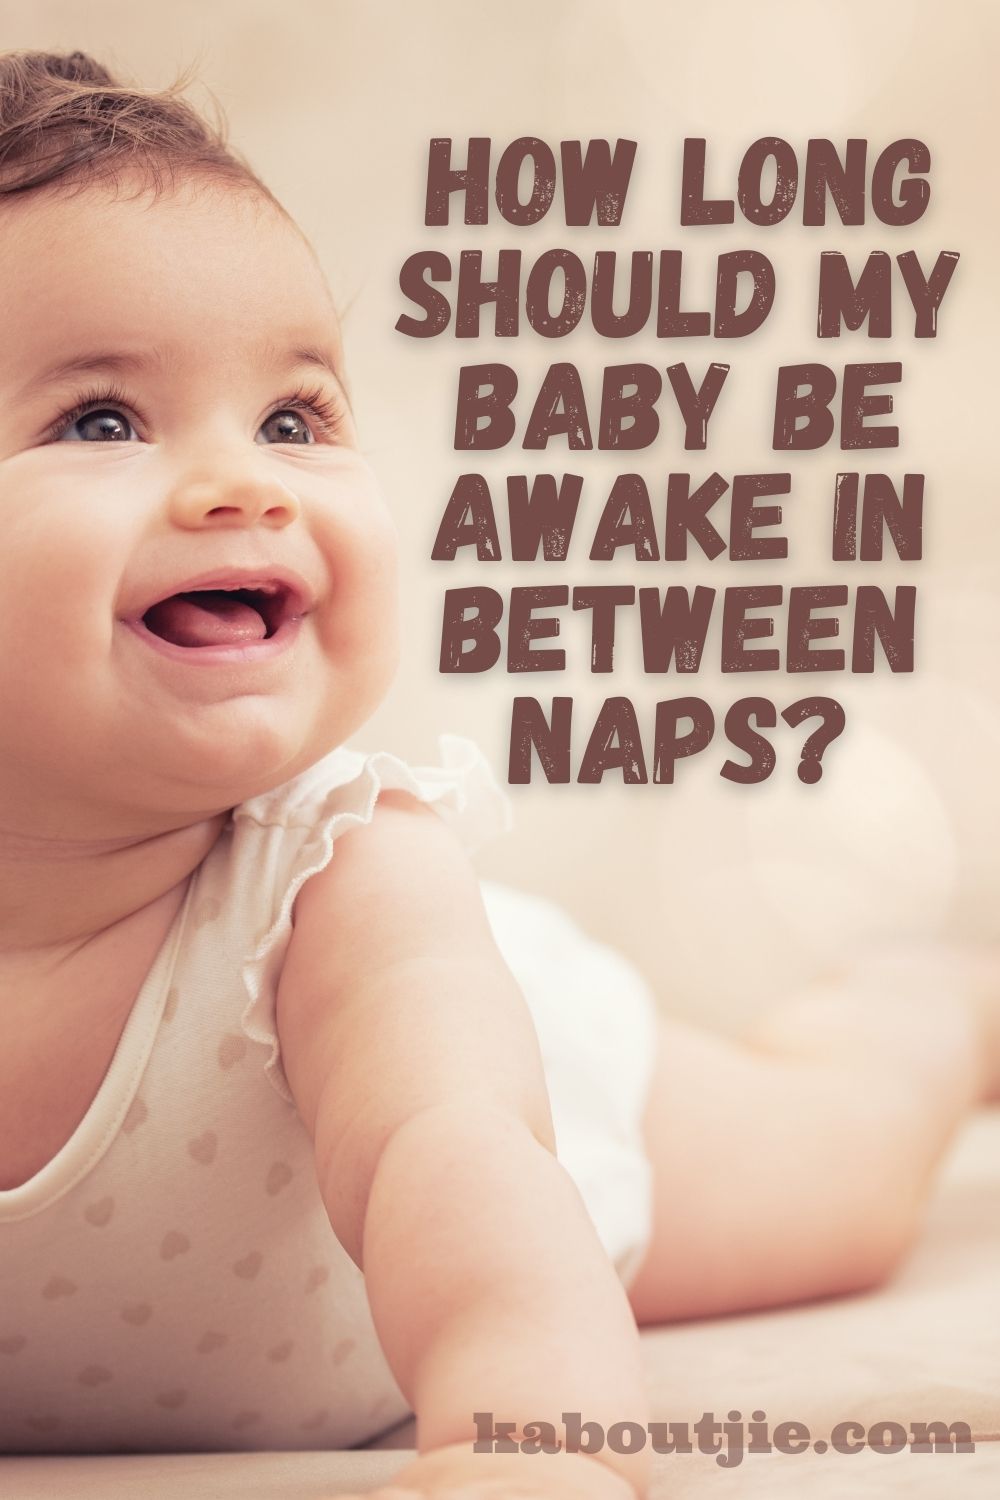 How long should my baby be awake in between naps?